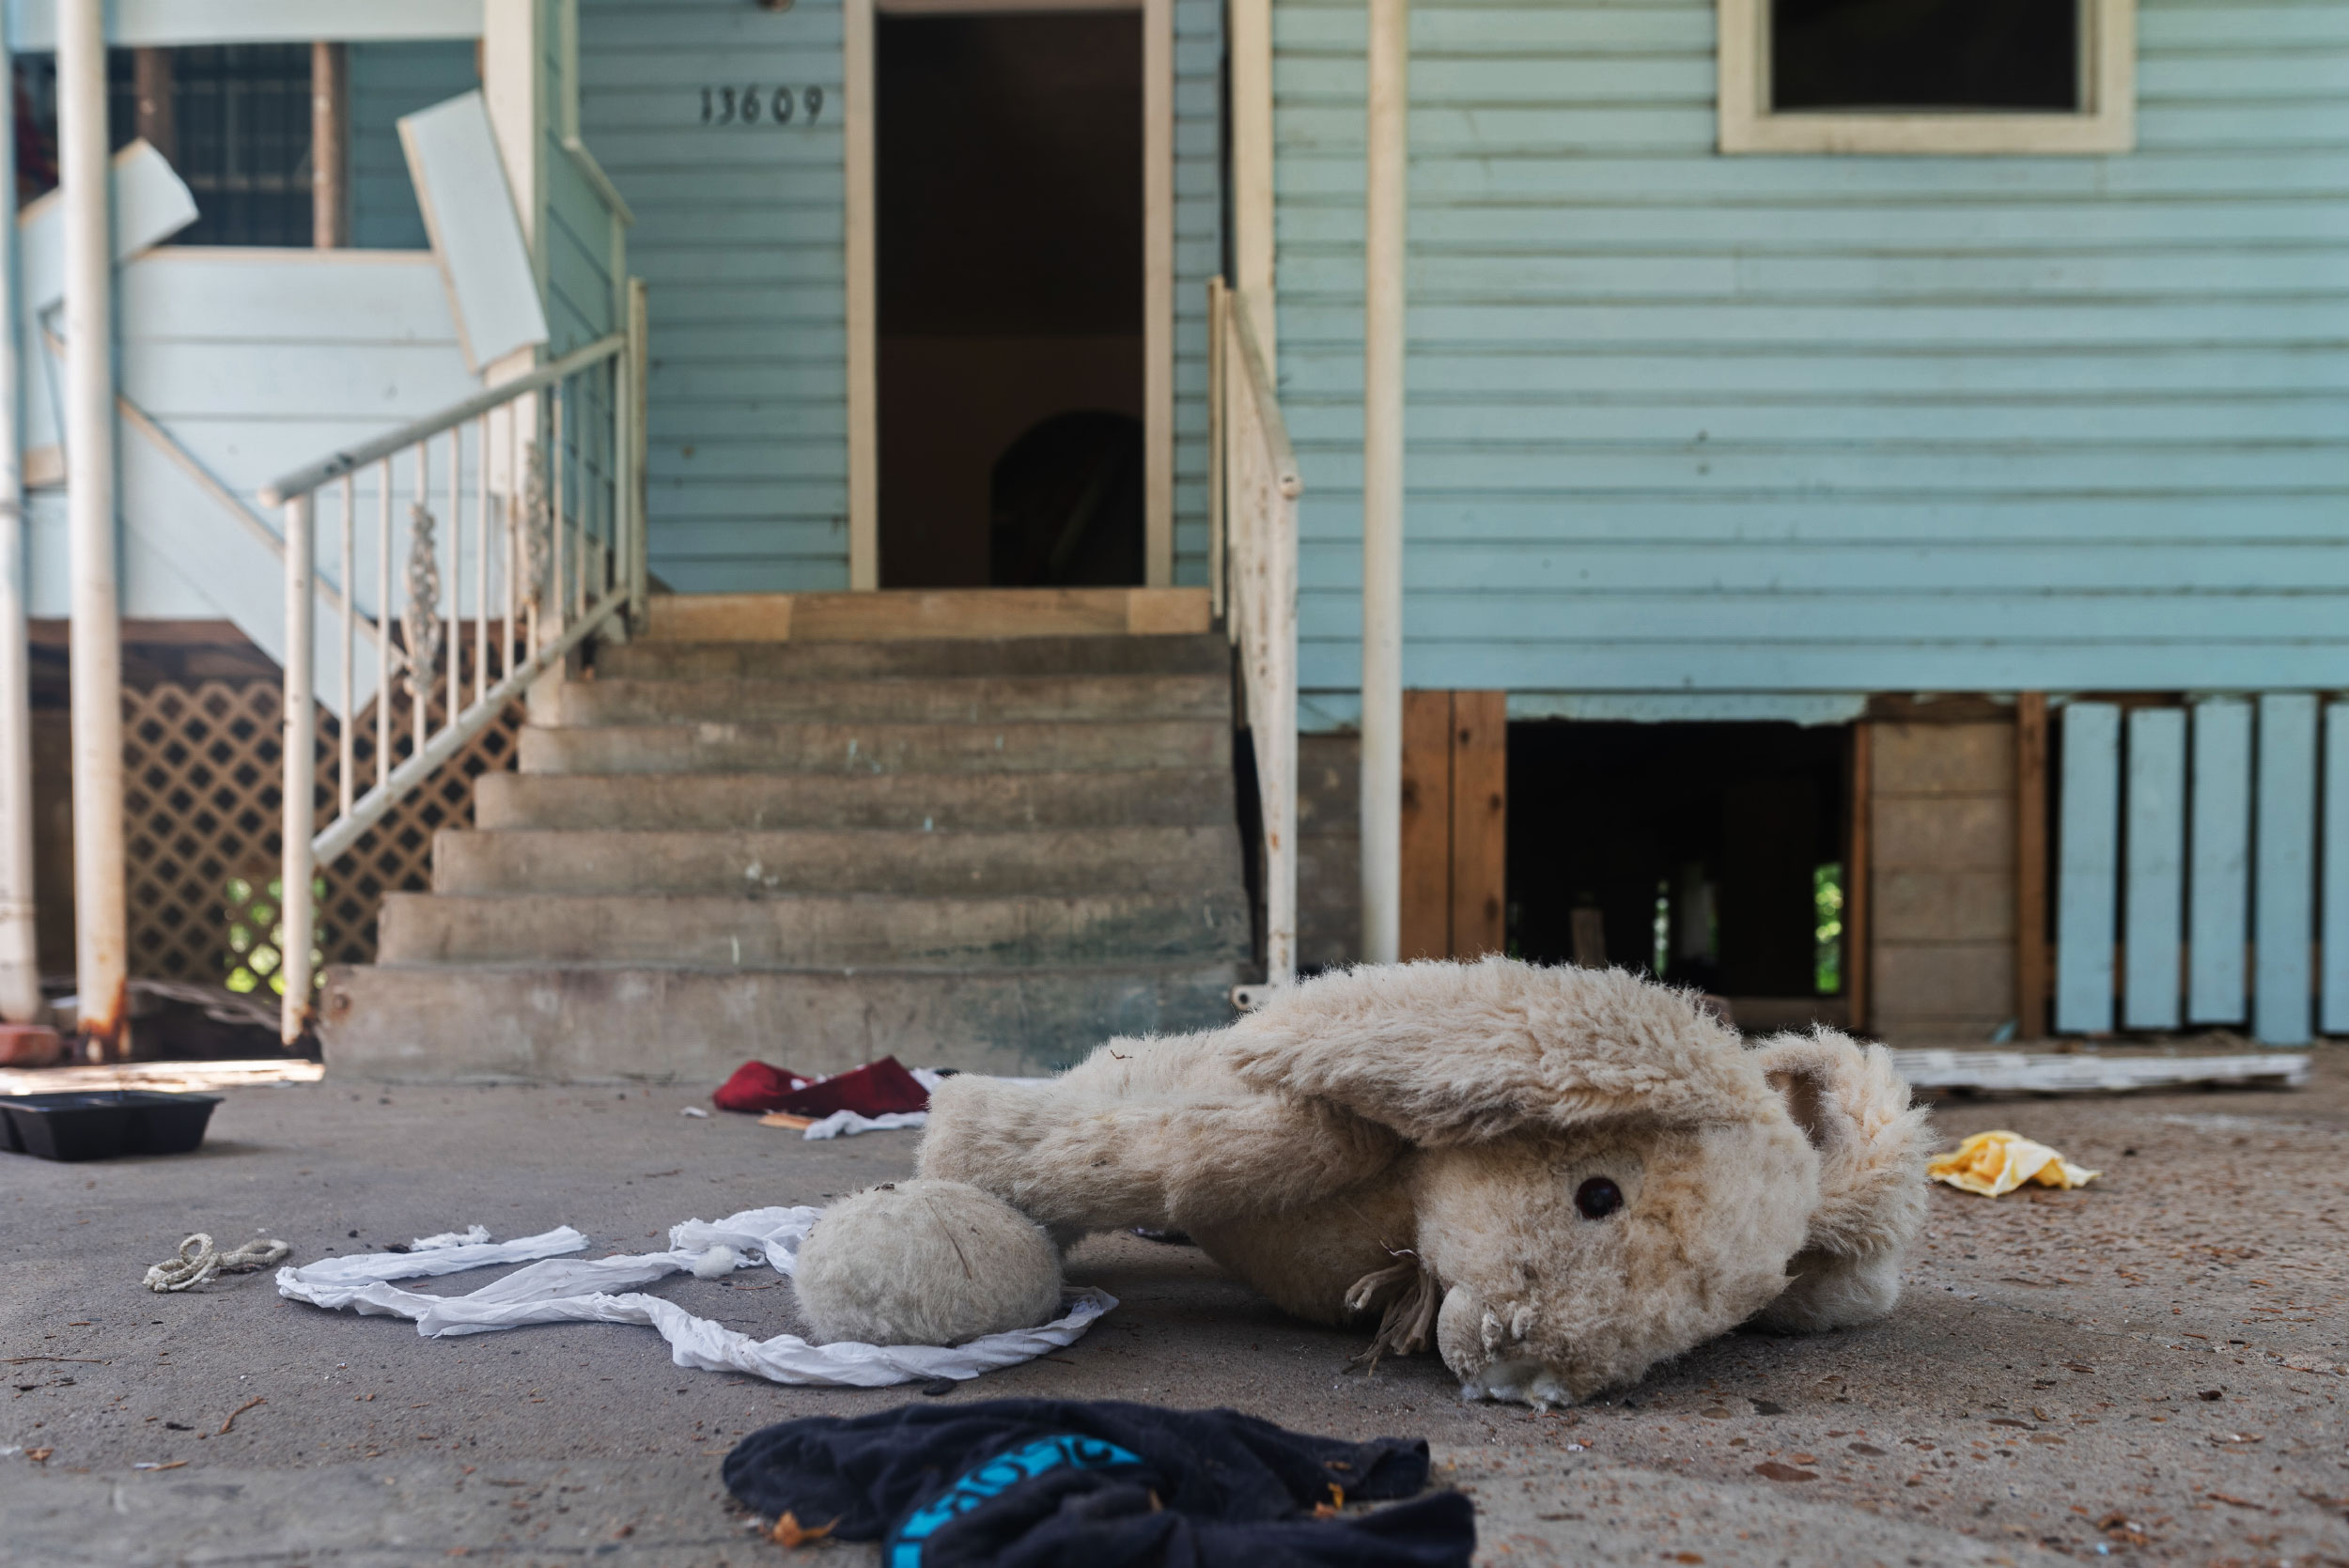 Clothes, food containers, and a tattered stuffed rabbit lie on the ground in front of an empty house in Allen Field.